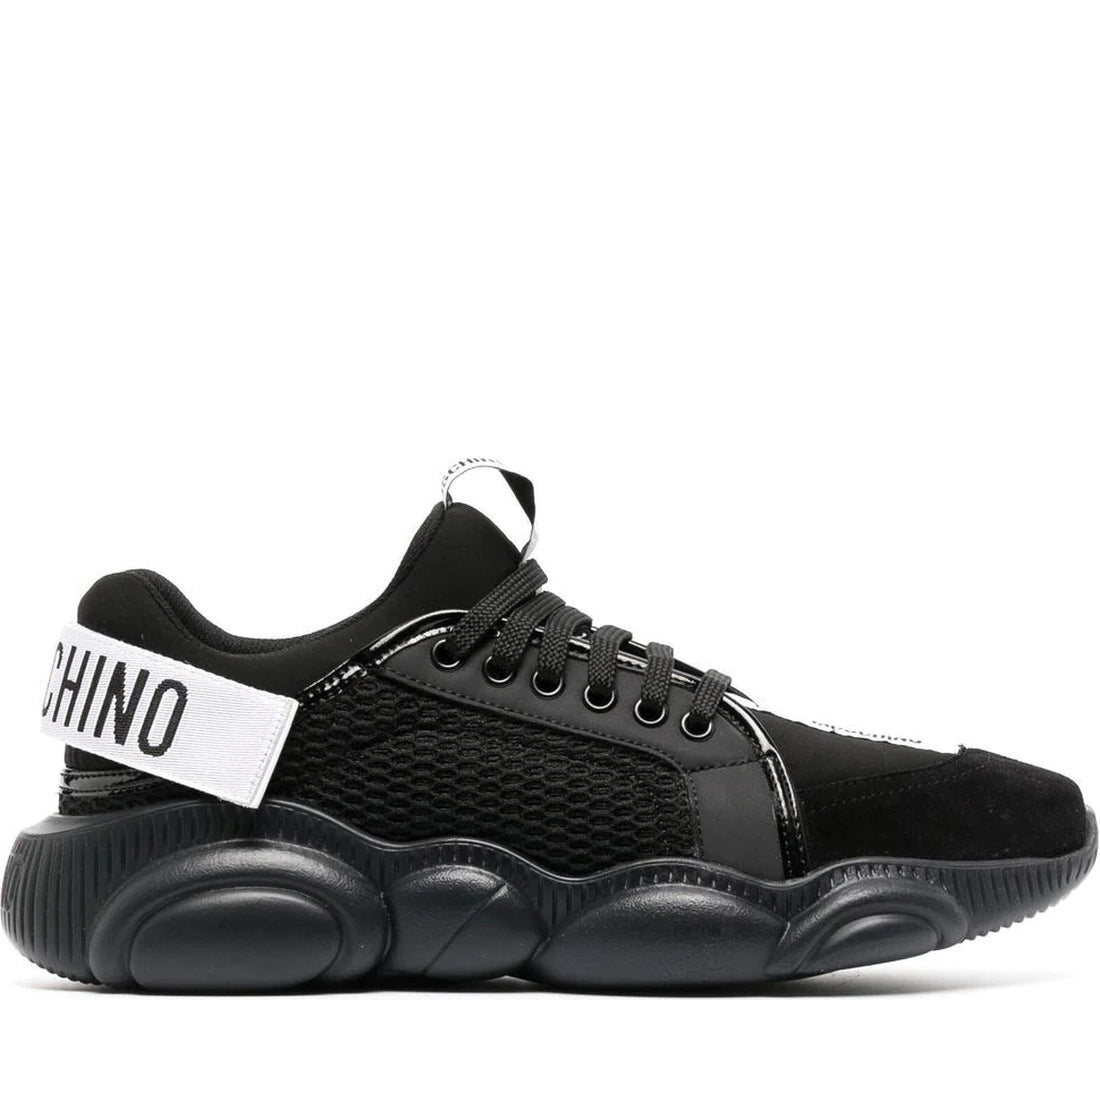 mix nero casual closed sneakers